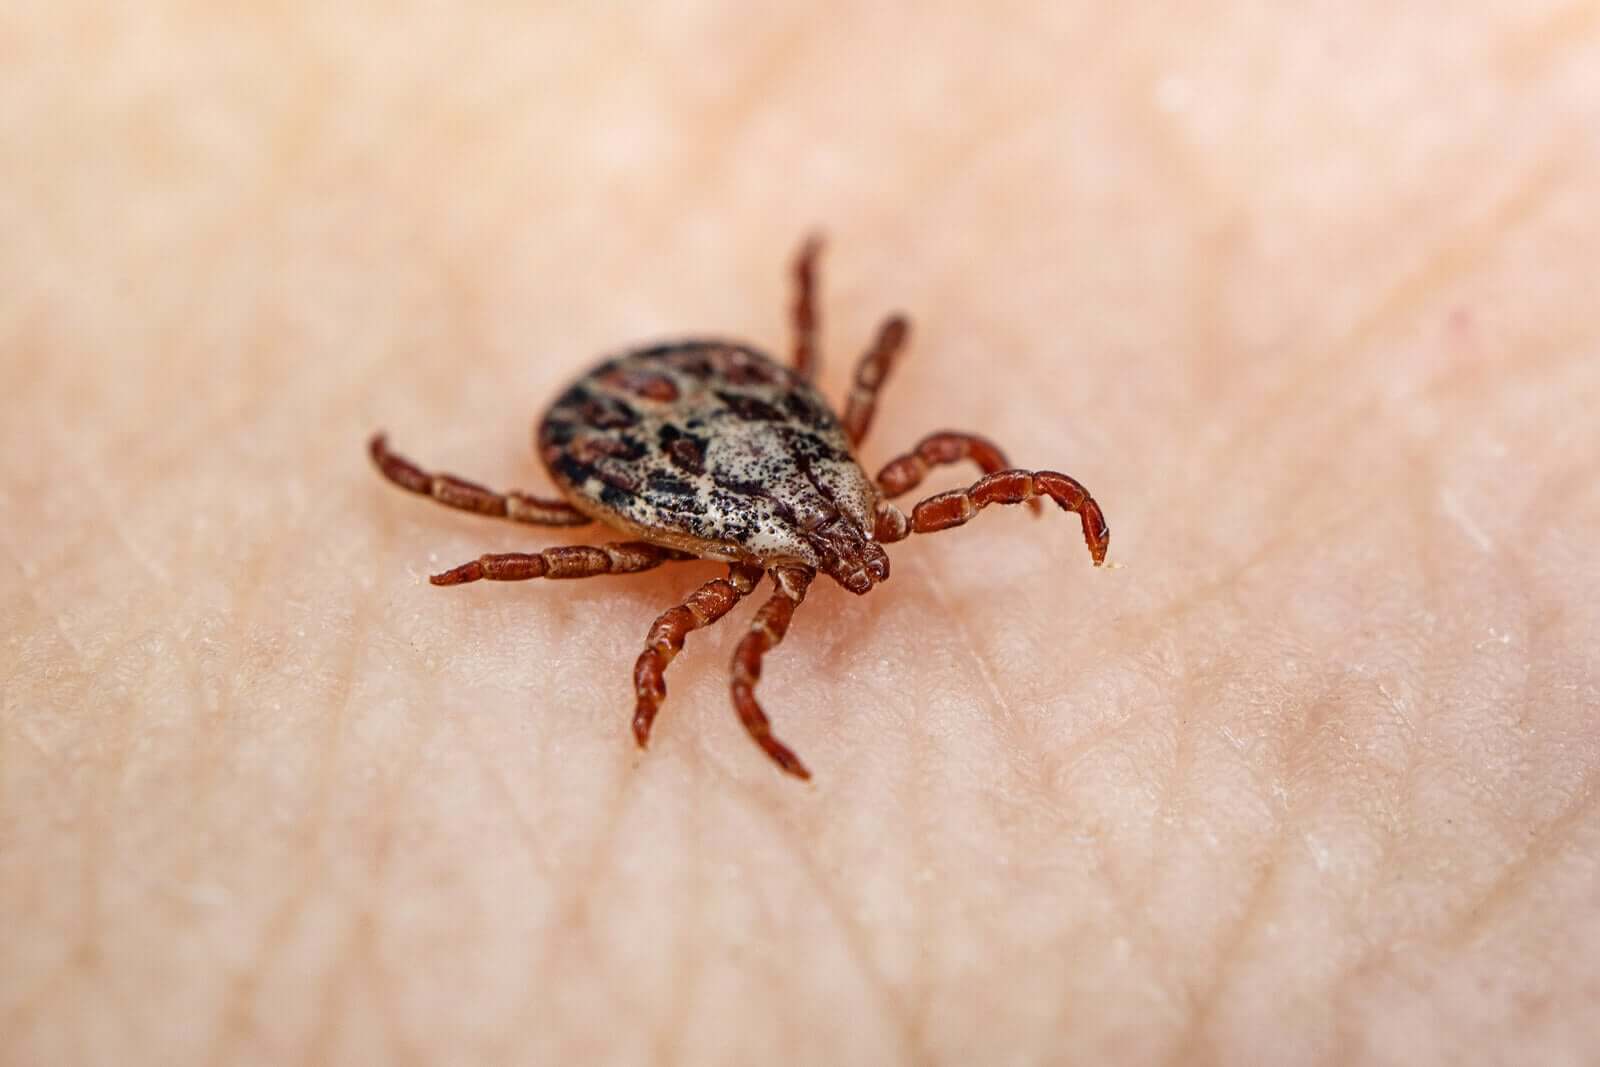 A tick crawling on a person's skin.